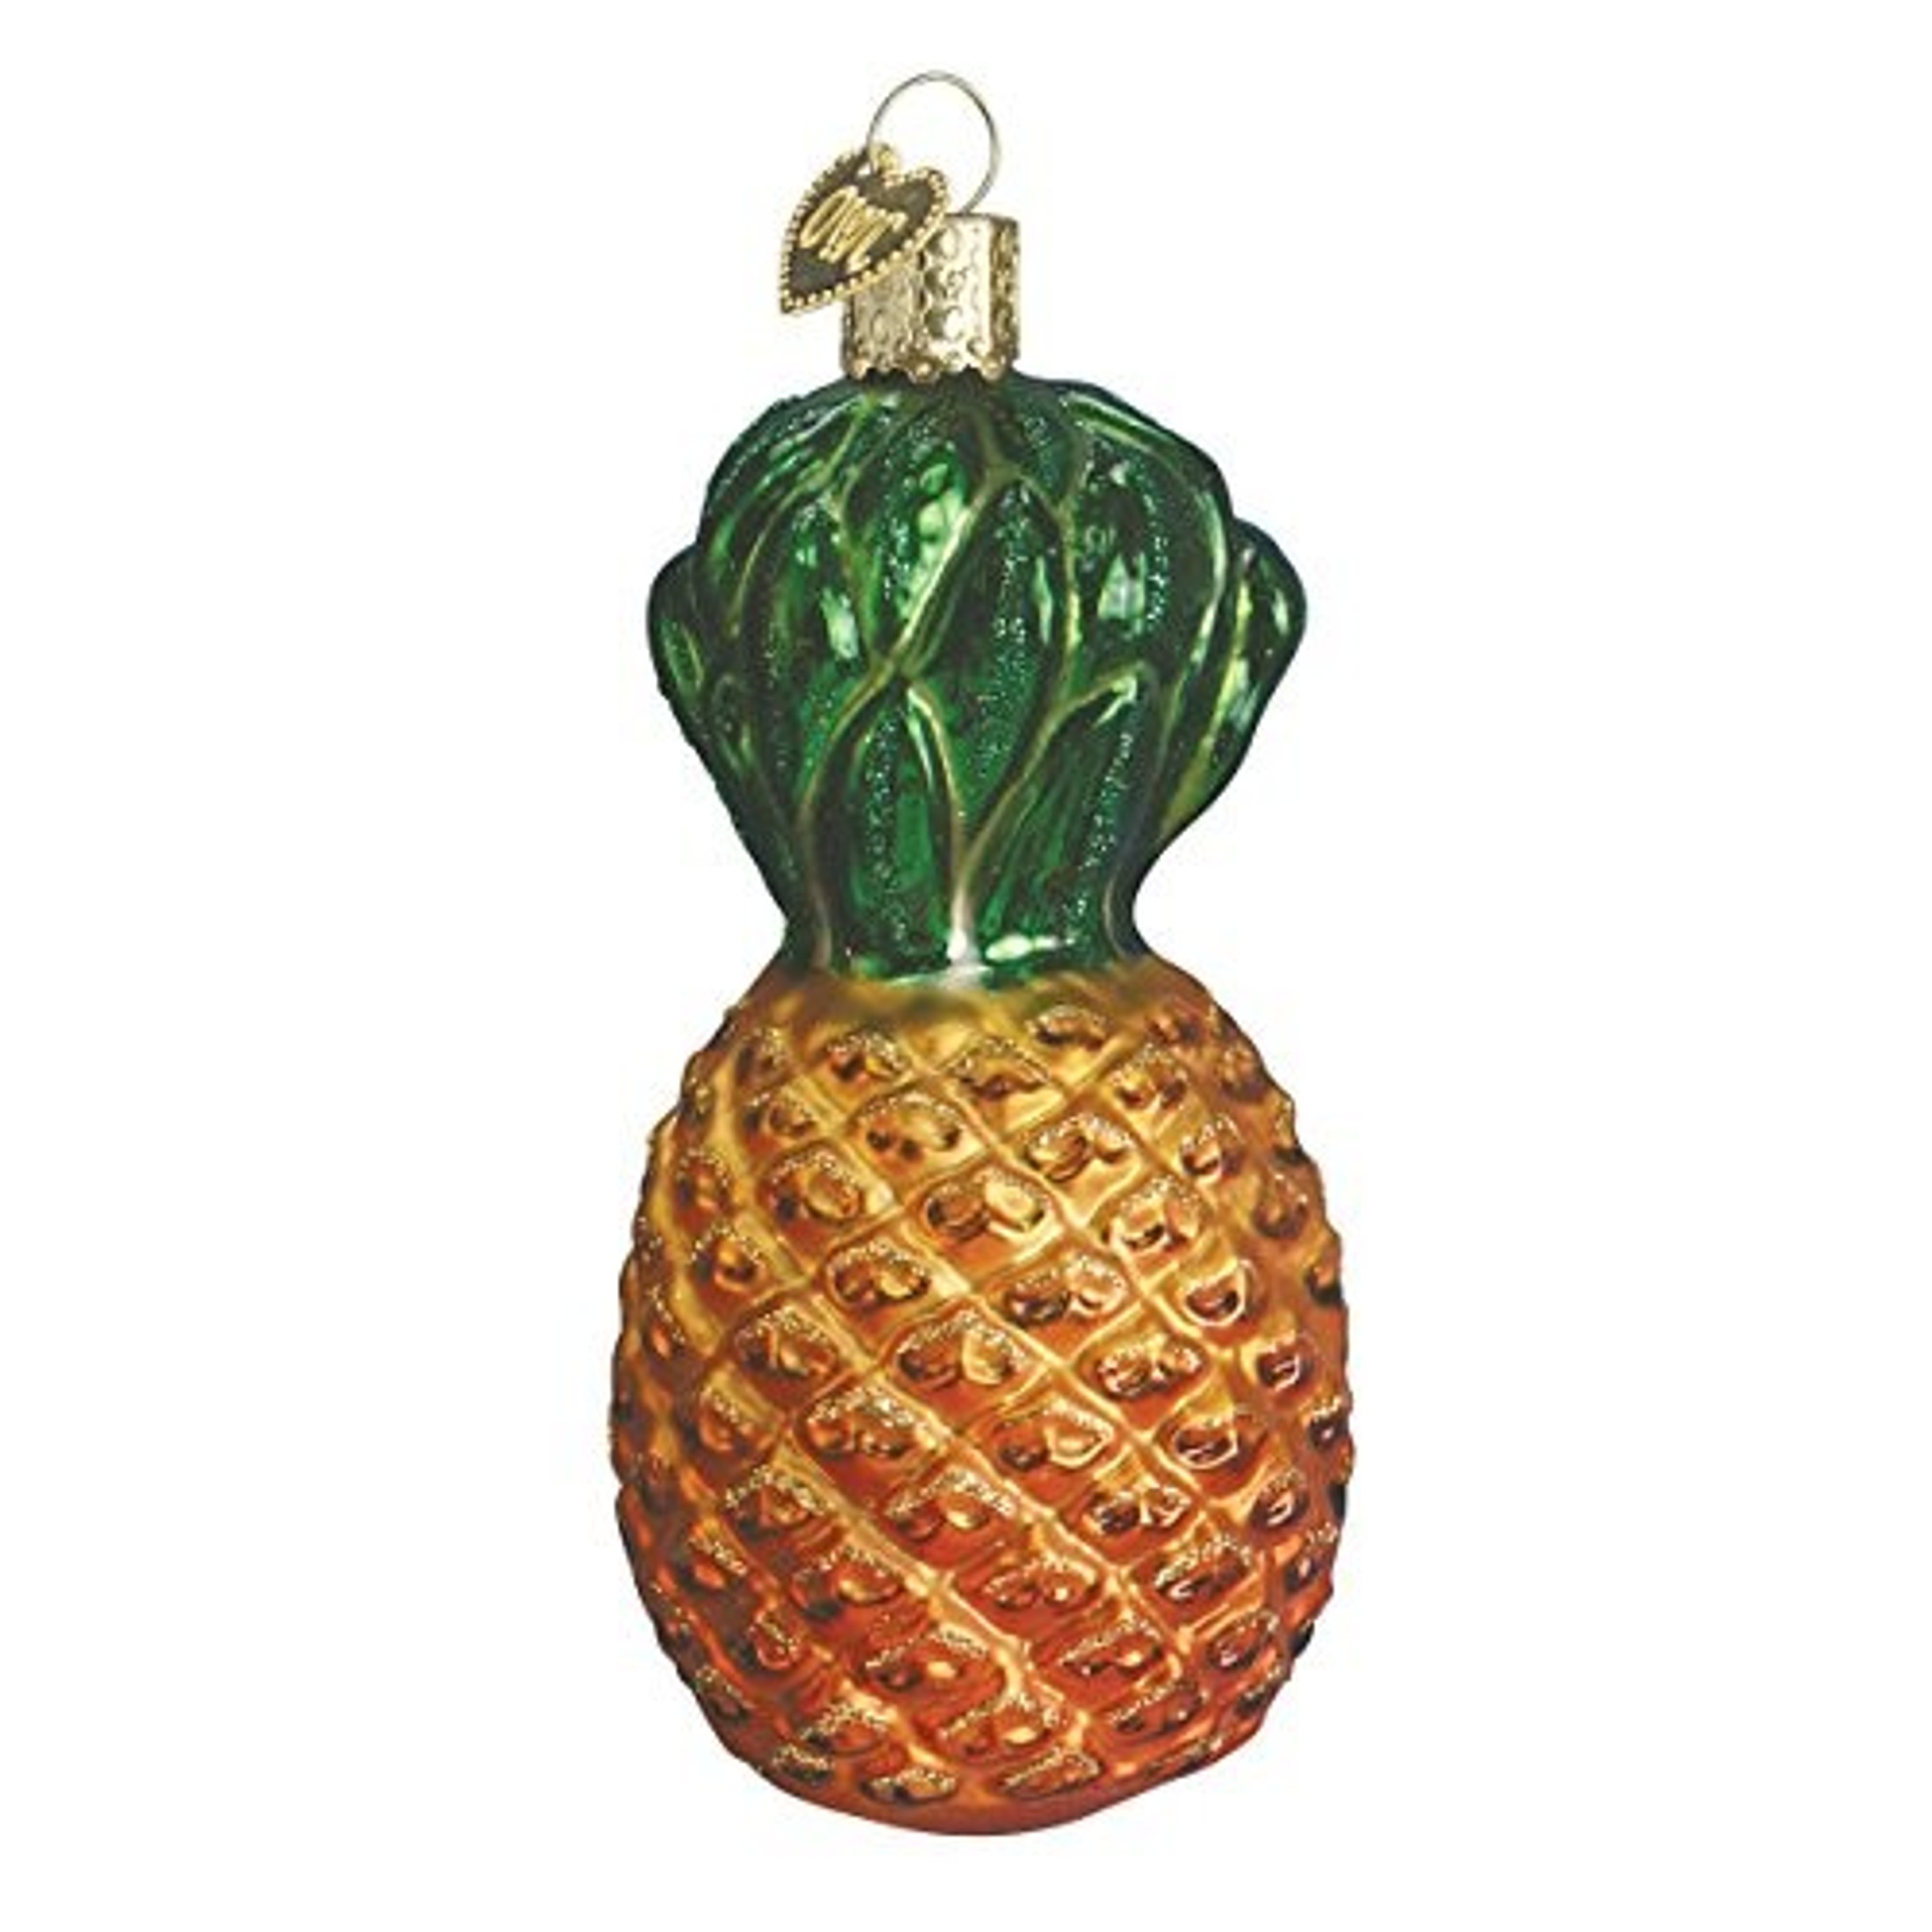 Old World Christmas Fruit Selection Glass Blown Ornaments, Pineapple